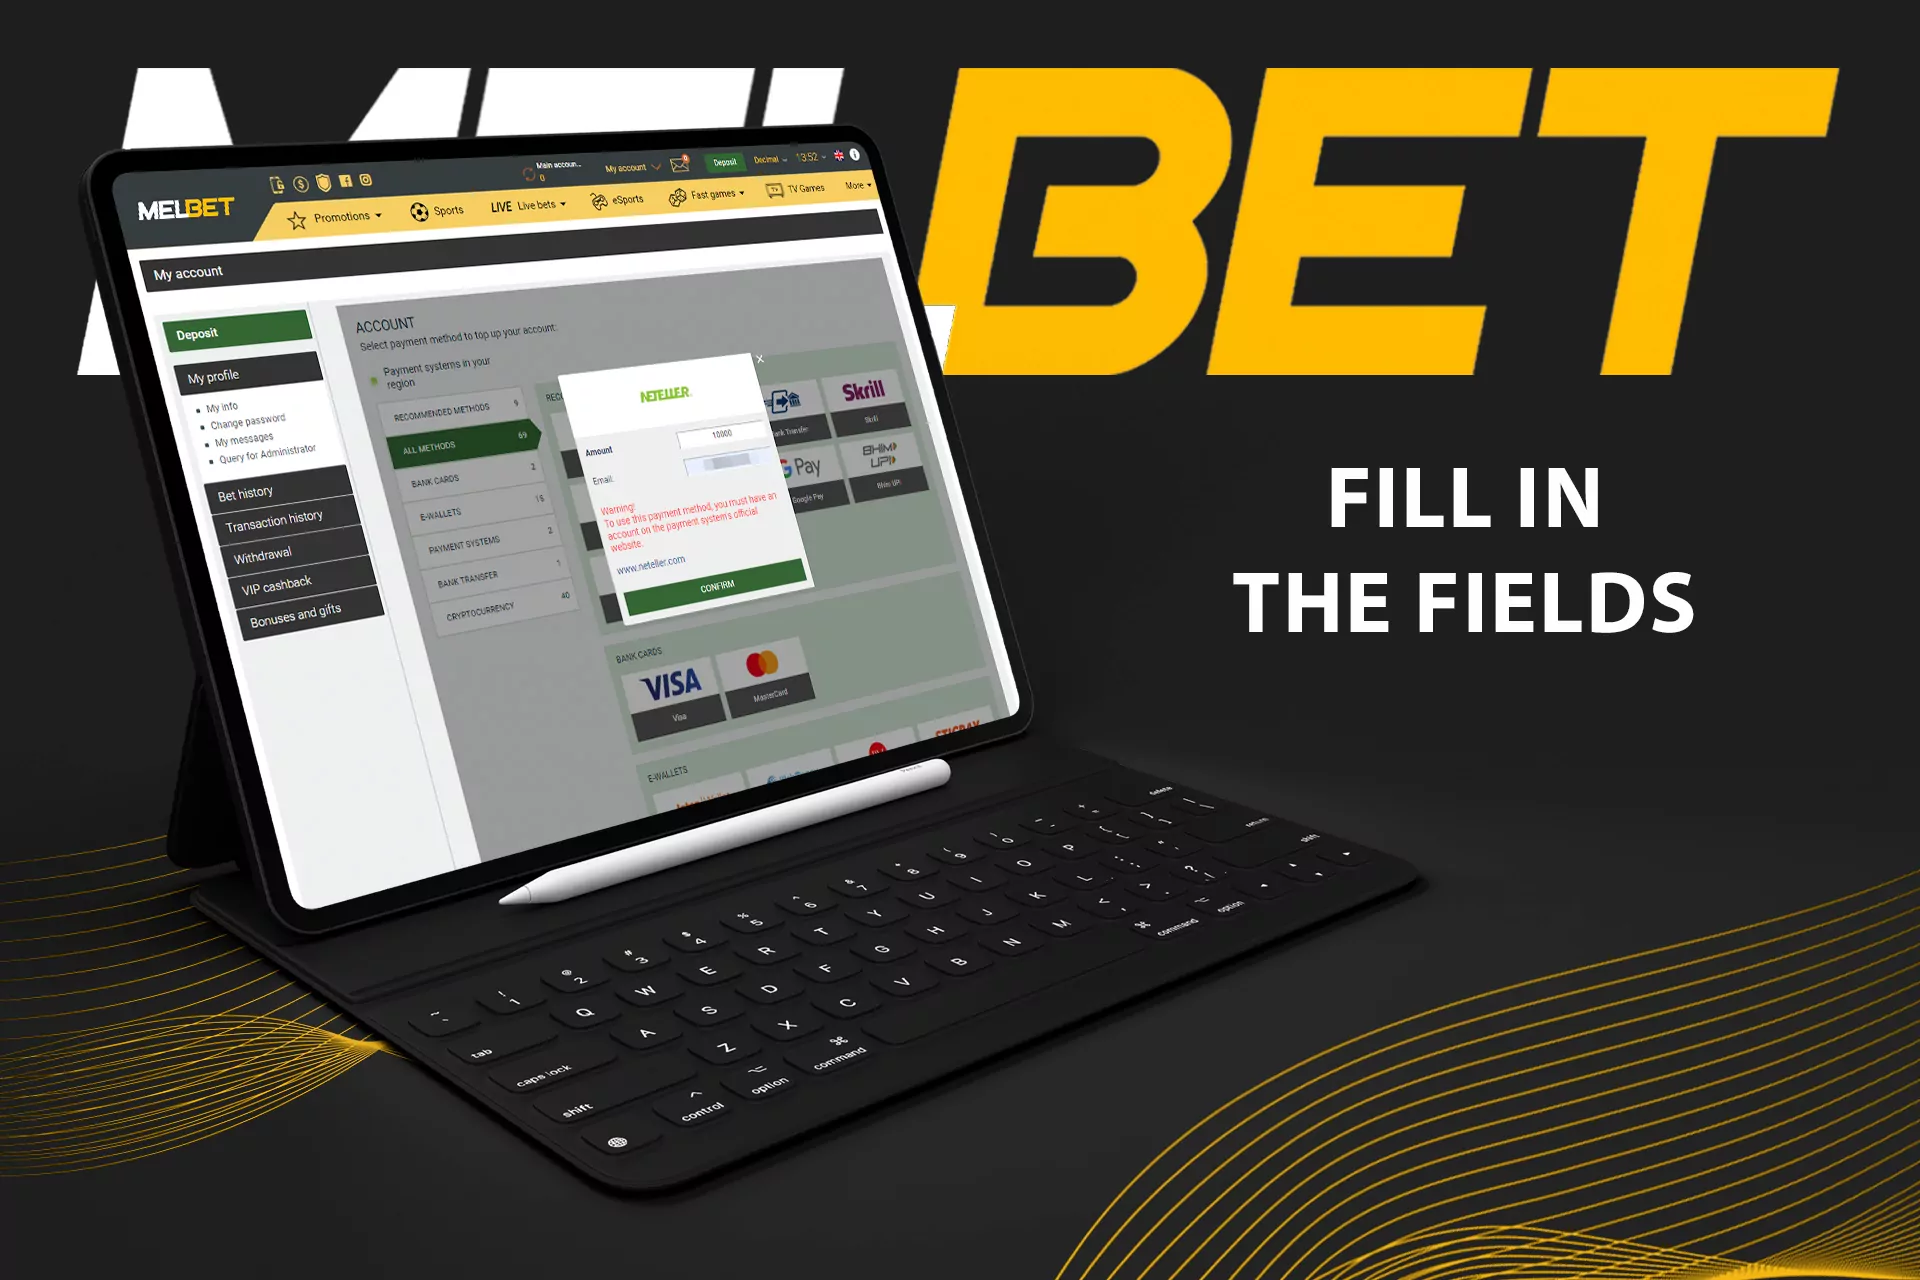 Fill in the fields and click on the deposit button at Melbet.